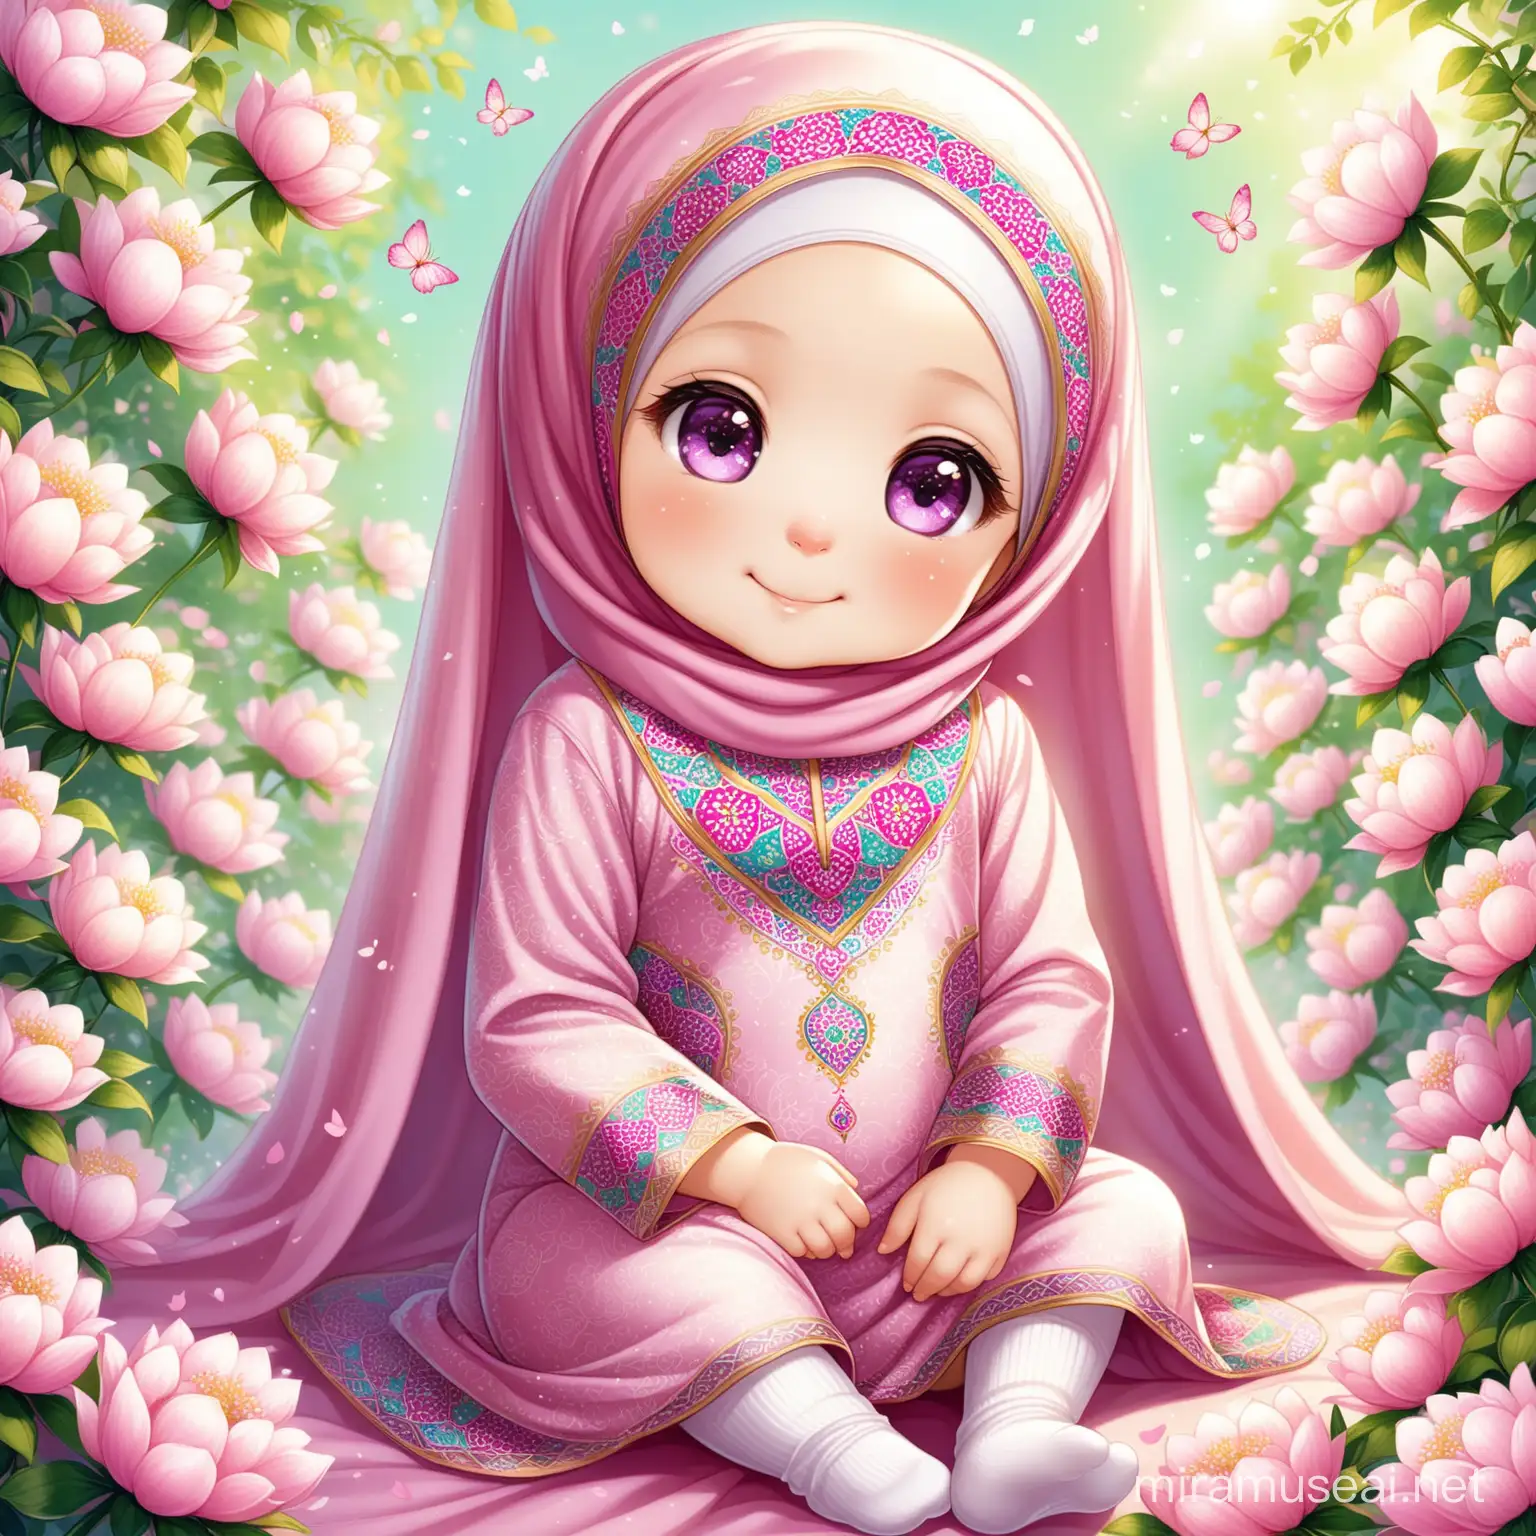 Cute Persian Girl Surrounded by Pink Spring Flowers